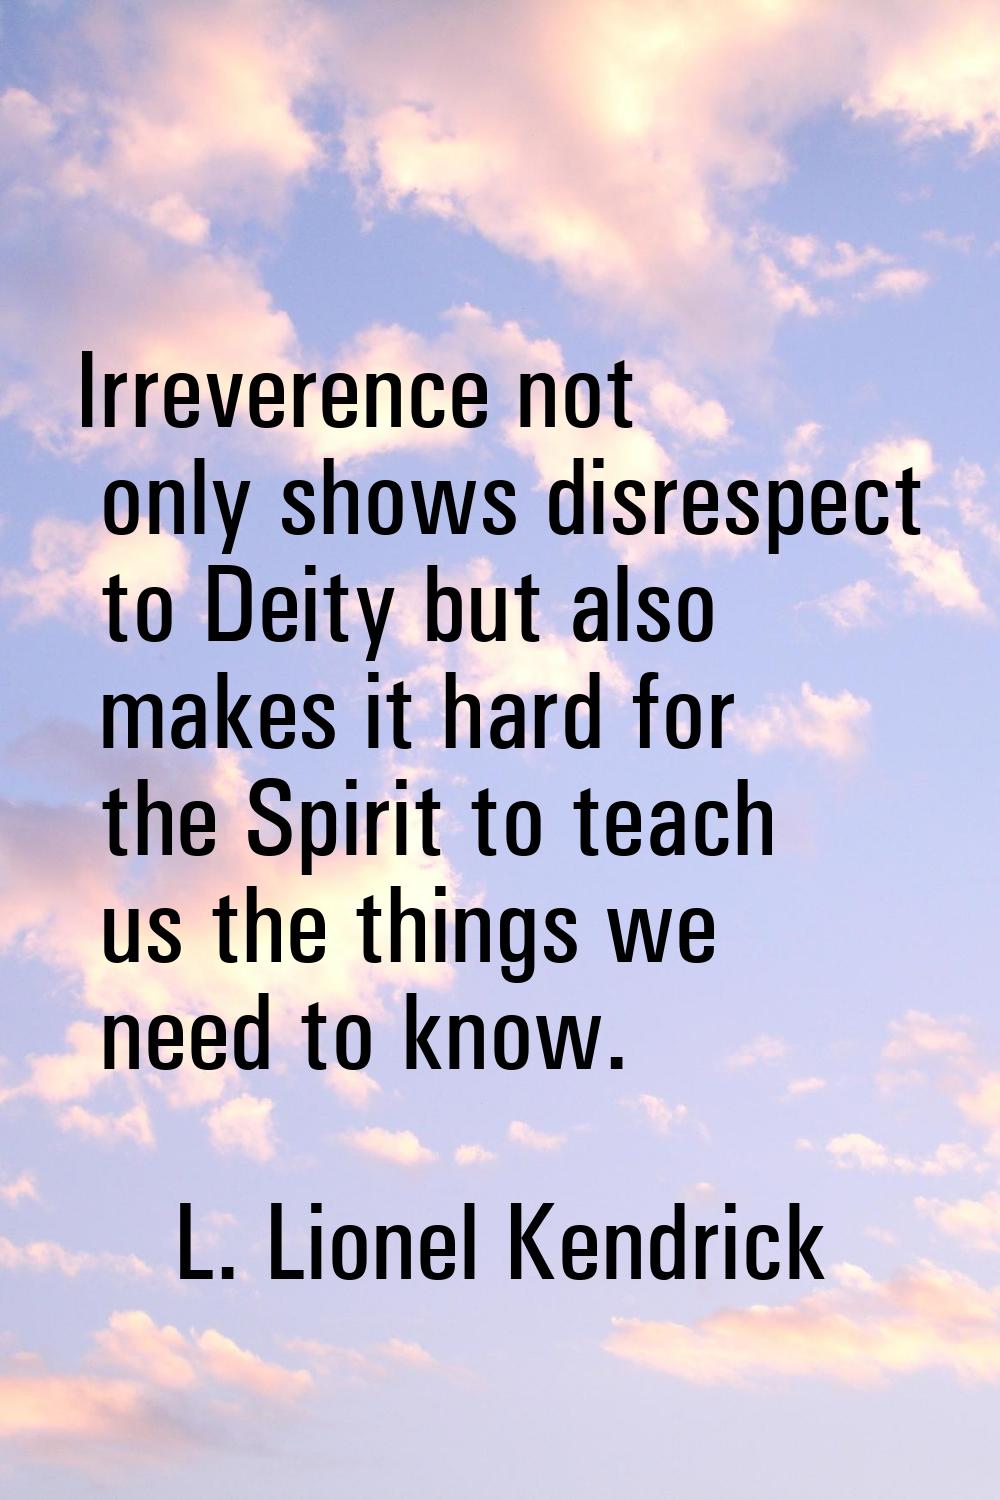 Irreverence not only shows disrespect to Deity but also makes it hard for the Spirit to teach us th